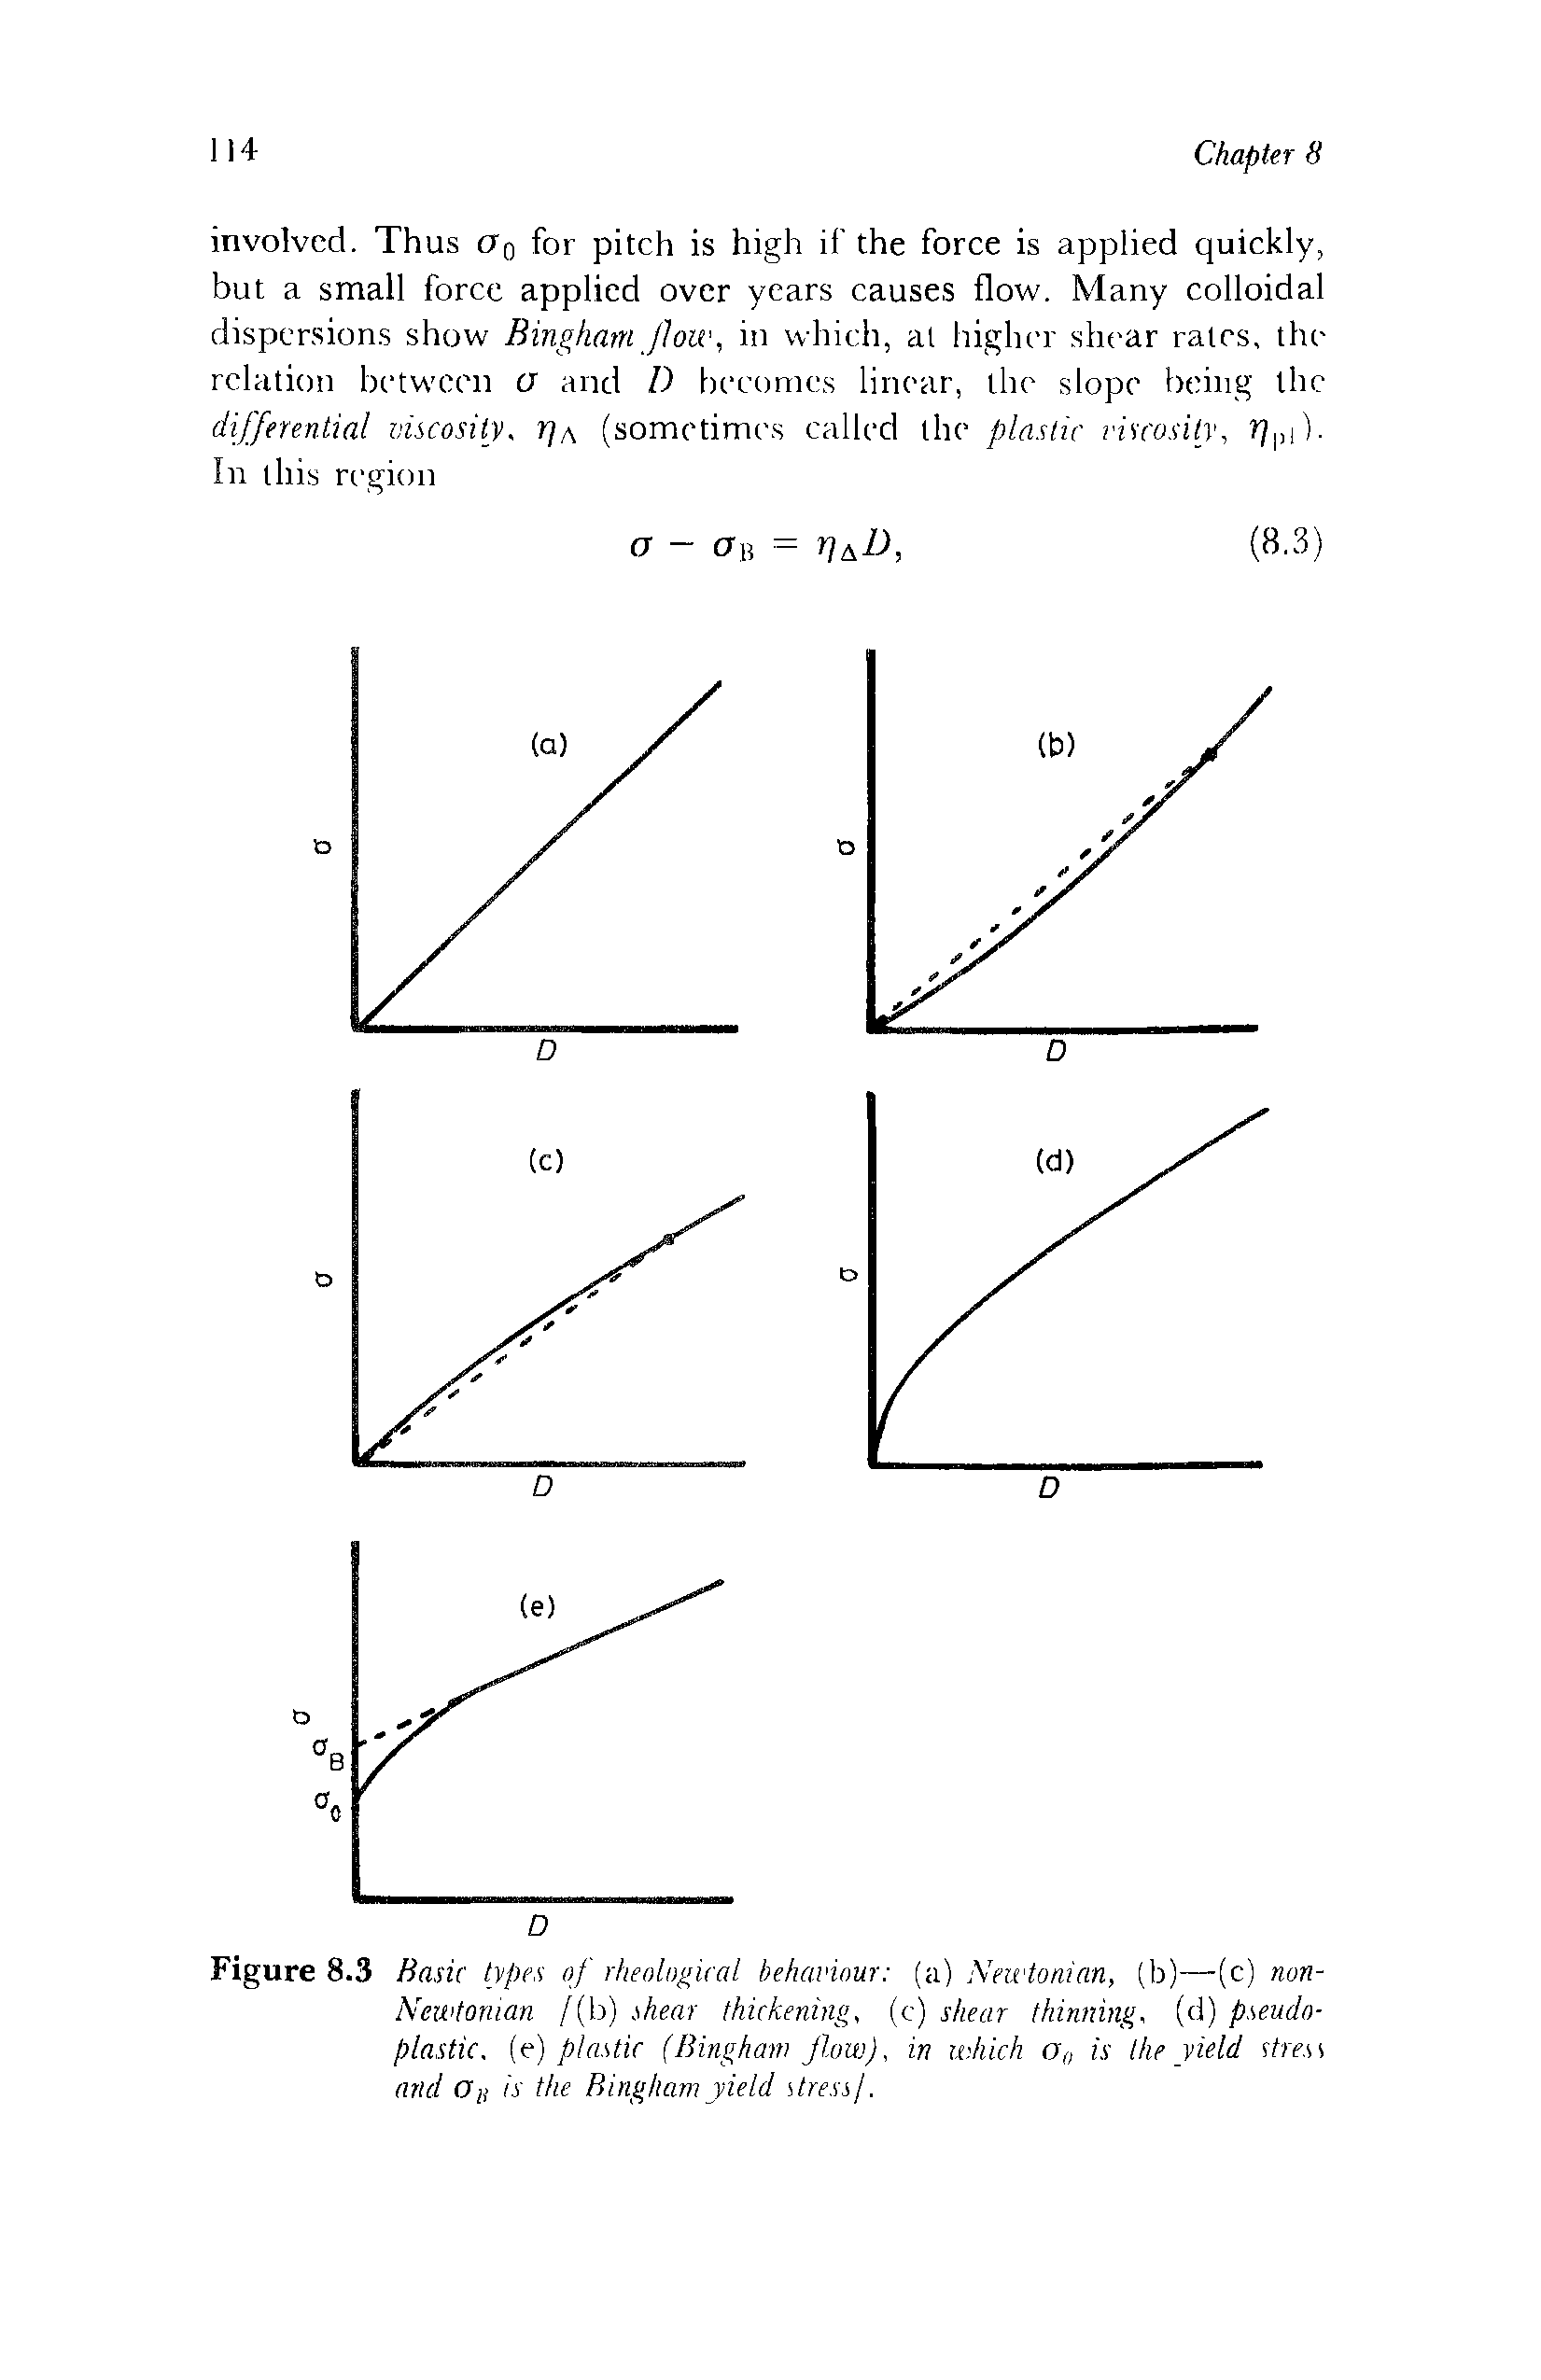 Figure 8.3 Basic types of rheological behaviour (a) Newtonian, (b)—(c) non-Newtonian /(b) shear thickening, (c) shear thinning, A) pseudoplastic. (e) plastic (Bingham plow), in which o0 is the yield stress and On is the Bingham yield stress/.